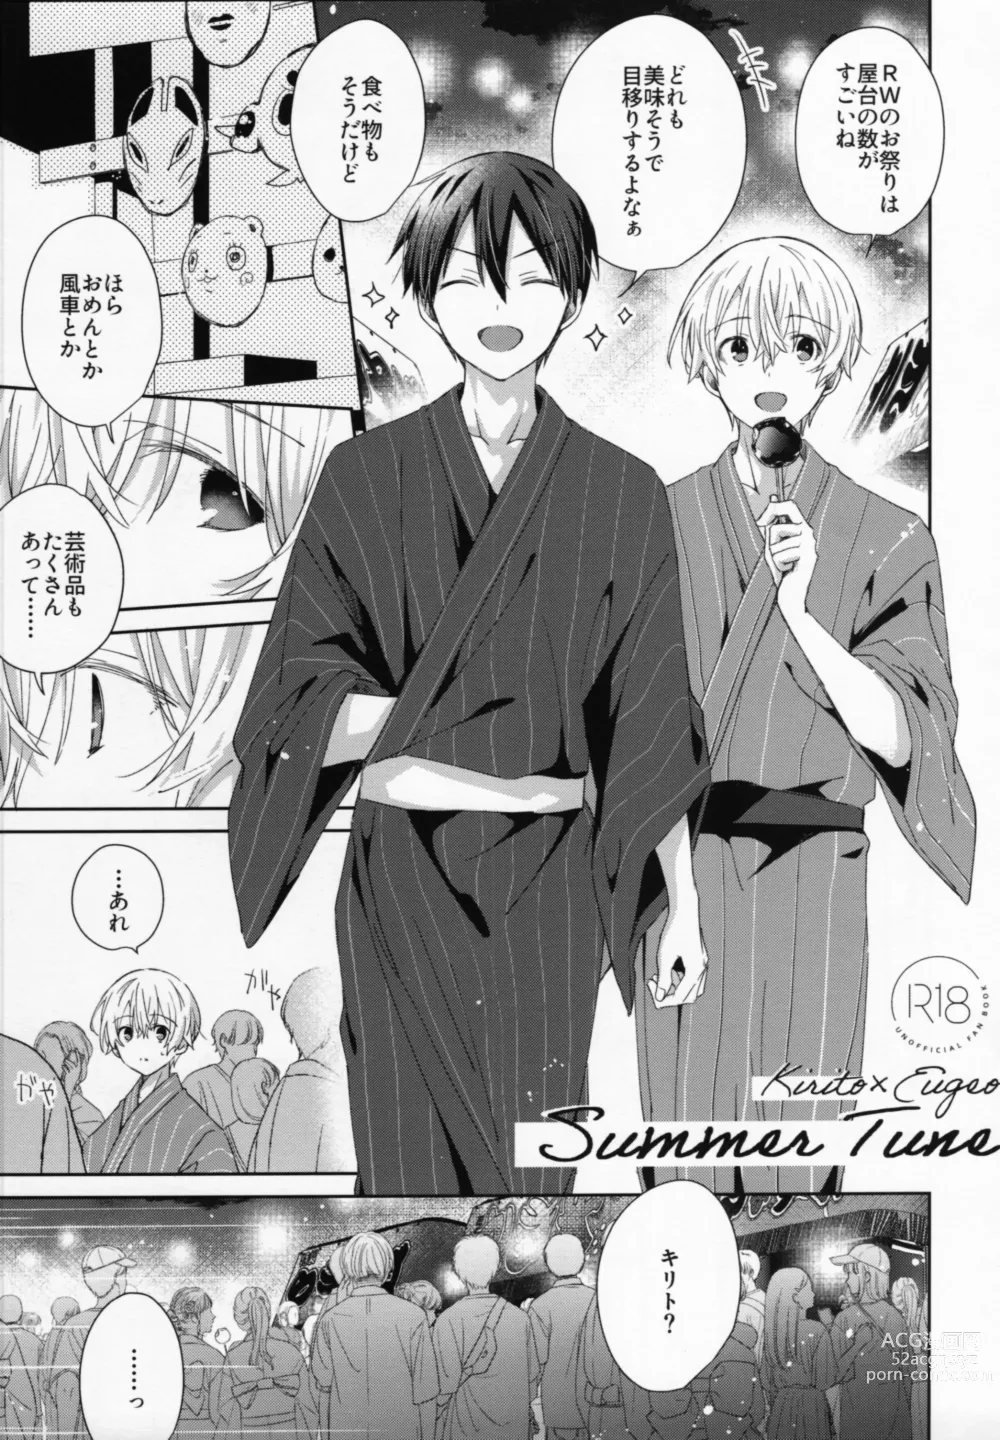 Page 1 of doujinshi Summer Tune